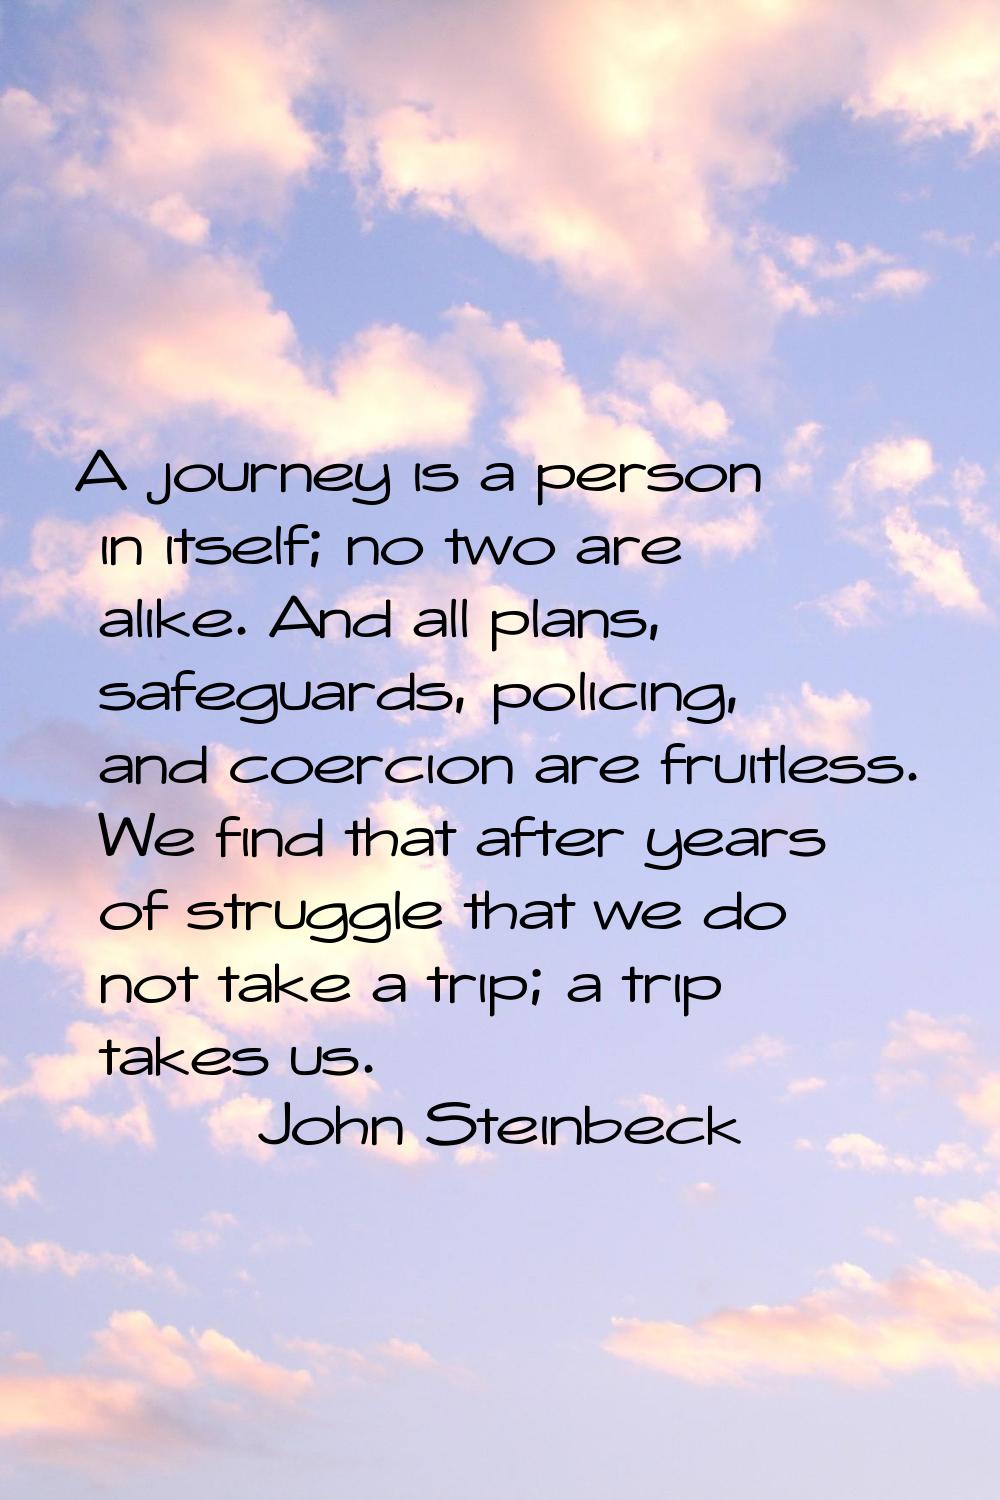 A journey is a person in itself; no two are alike. And all plans, safeguards, policing, and coercio